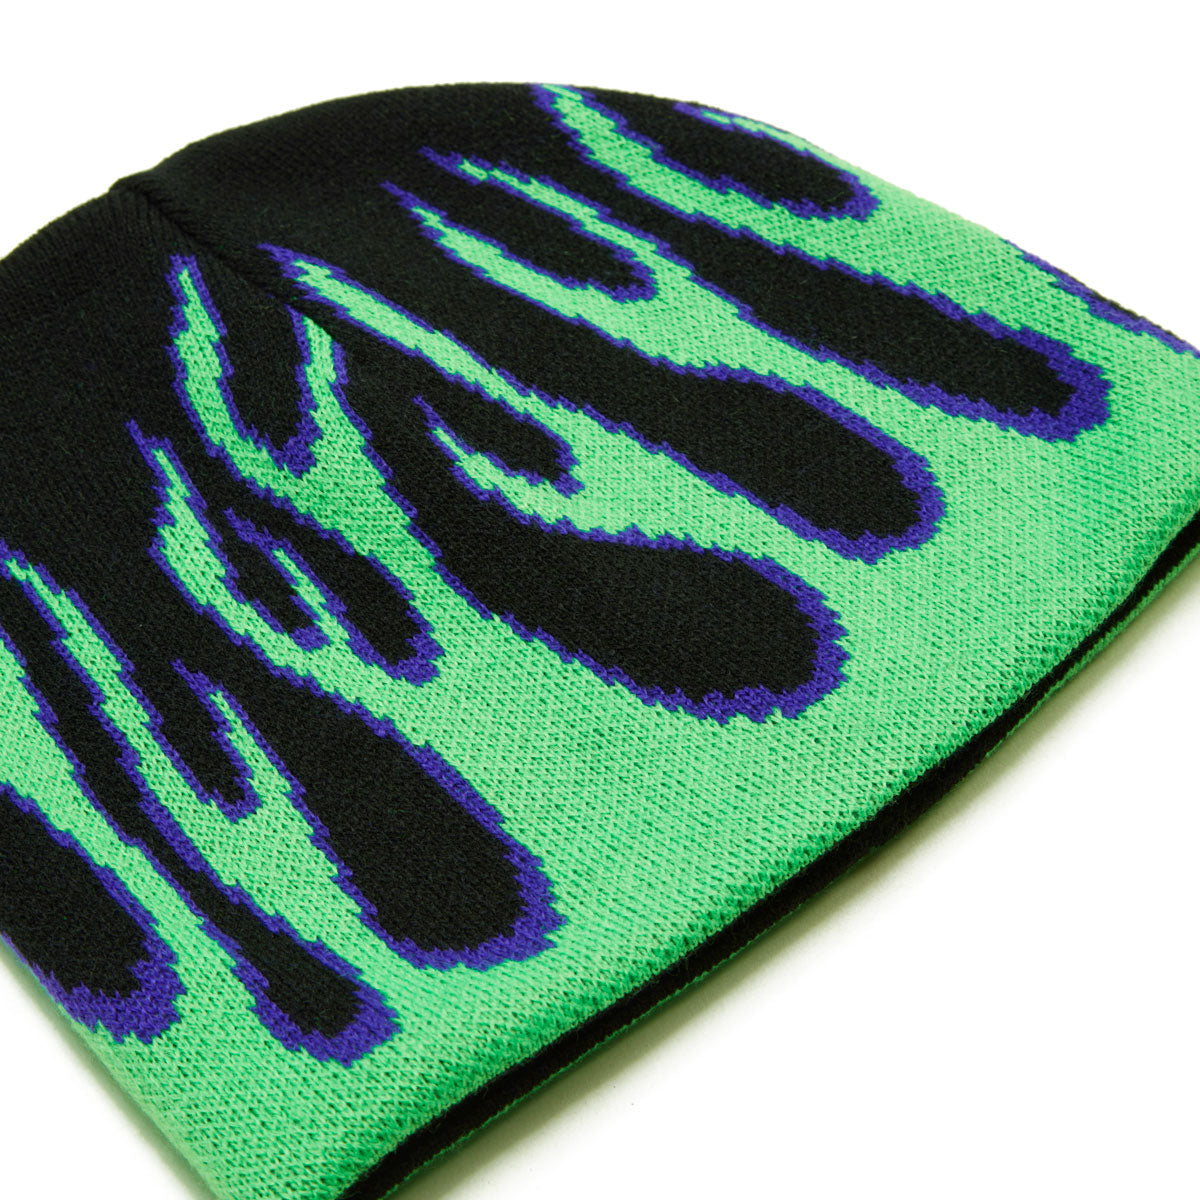 CCS Flames Reversible Skully Beanie - Black/Green image 4